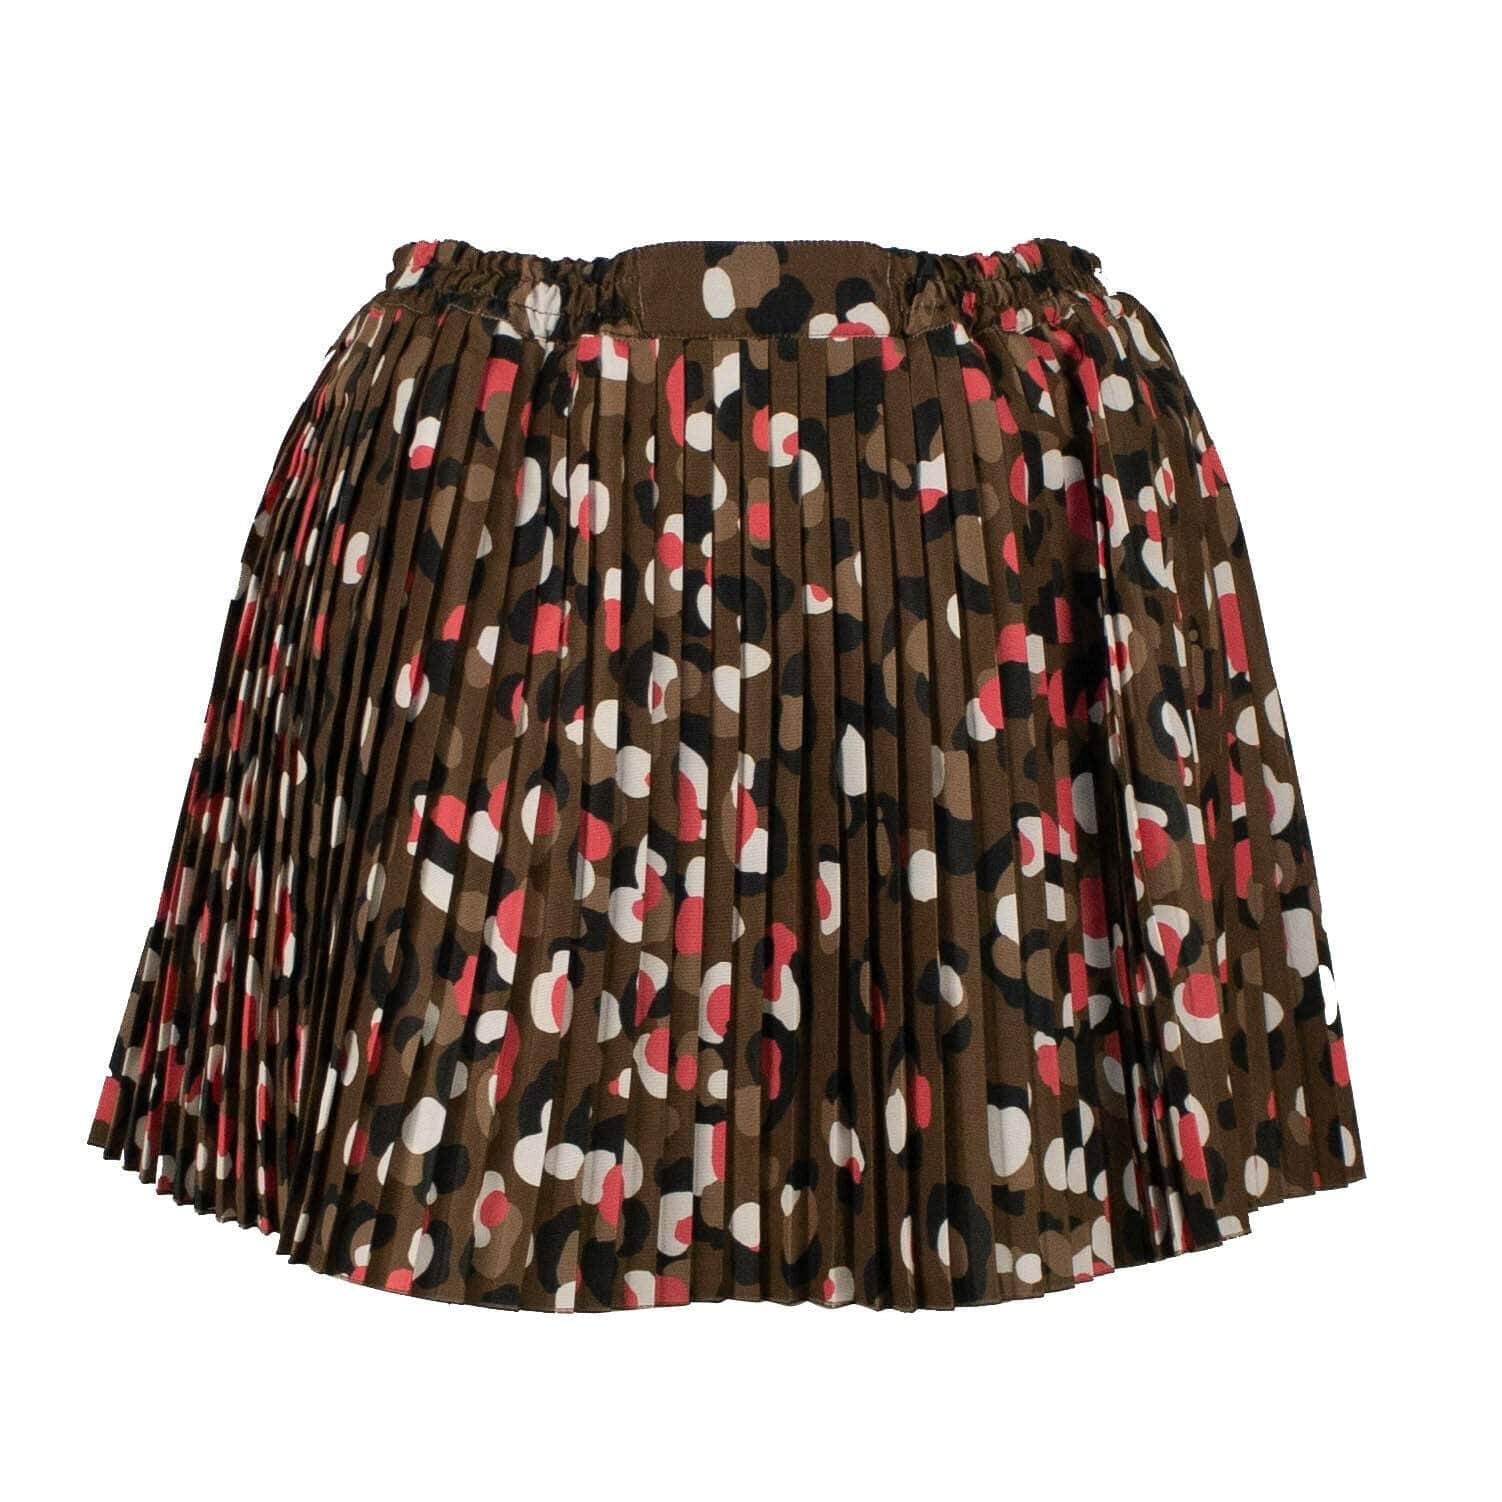 Red Valentino 250-500, chicmi, couponcollection, gender-womens, main-clothing, size-40, SPO, vwc1, womens-mini-skirts 40 Printed Pleated Mini Skirt 67V-419/40 67V-419/40